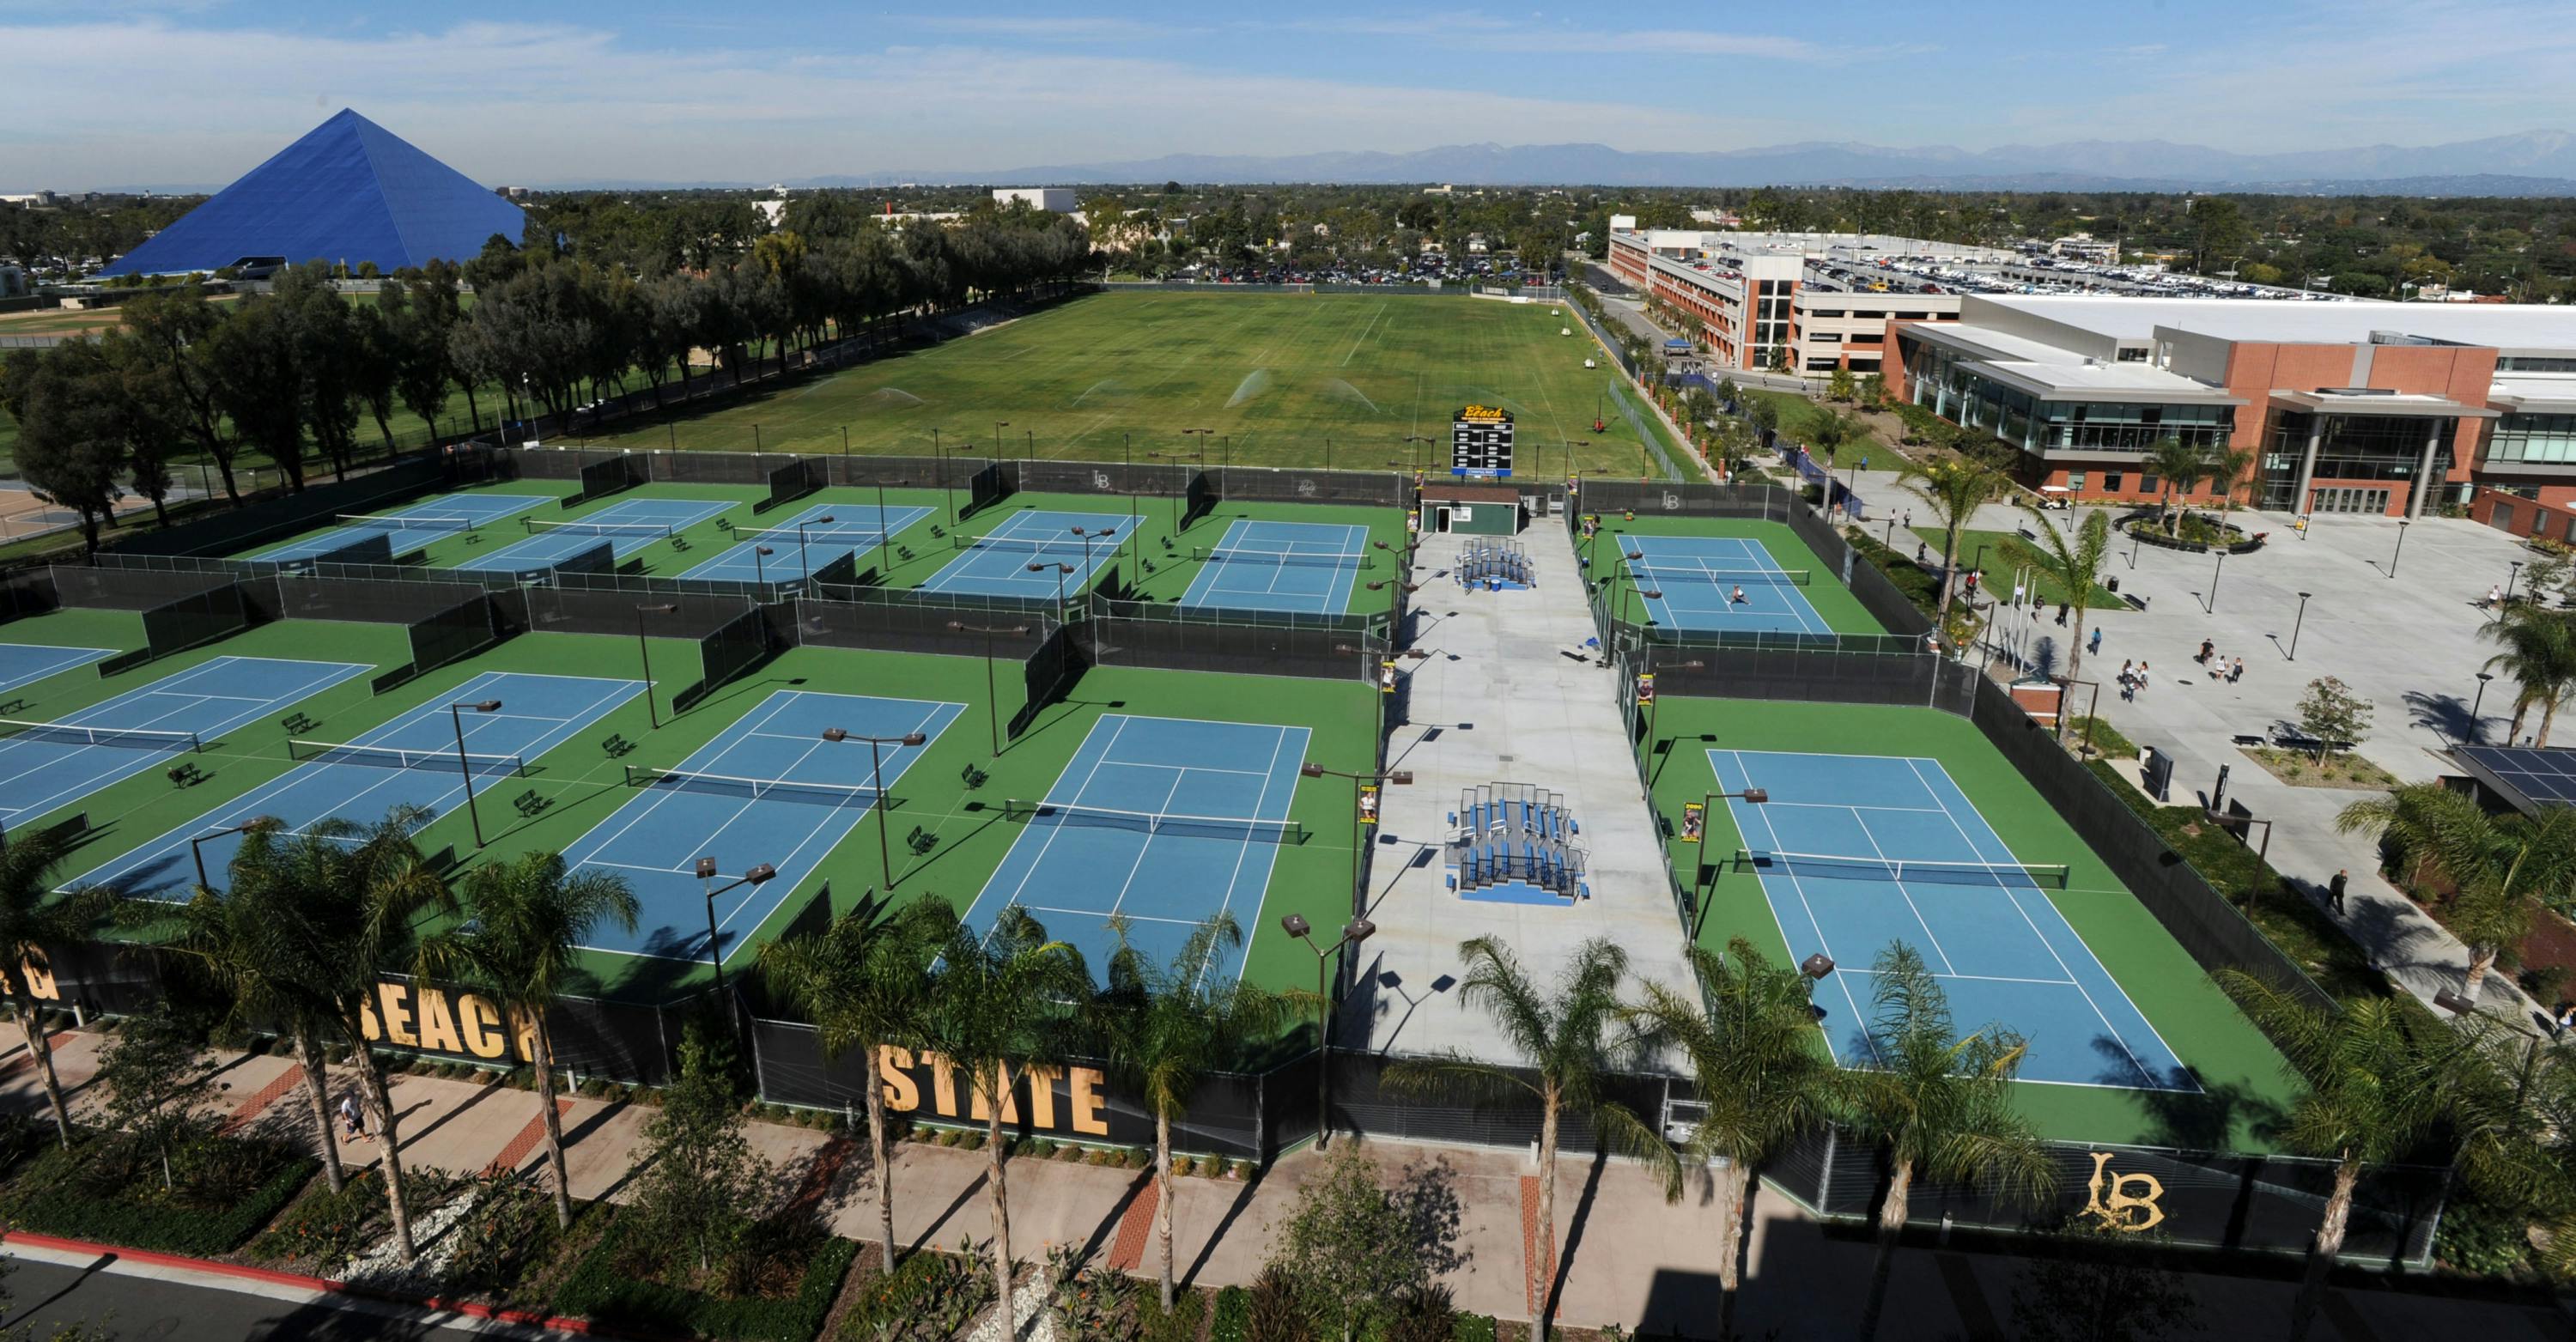 Image 1 of 2 of California State University, Long Beach Tennis Courts court